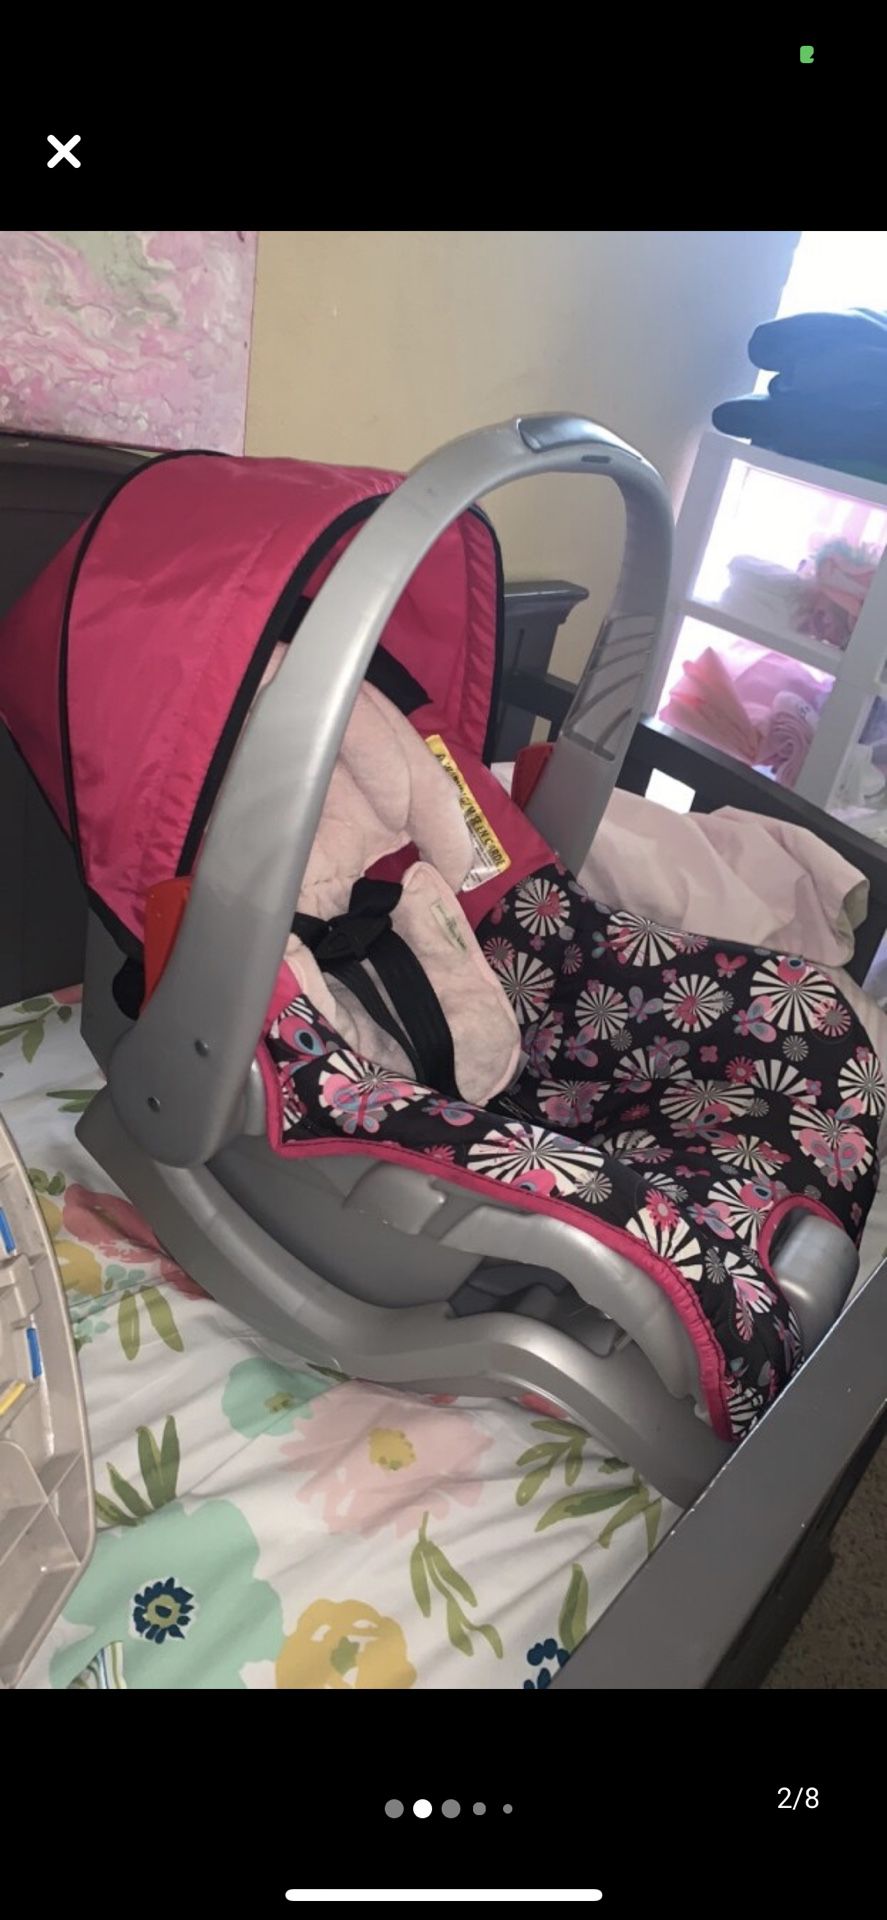 Evenflo car seat plus everything in pictures